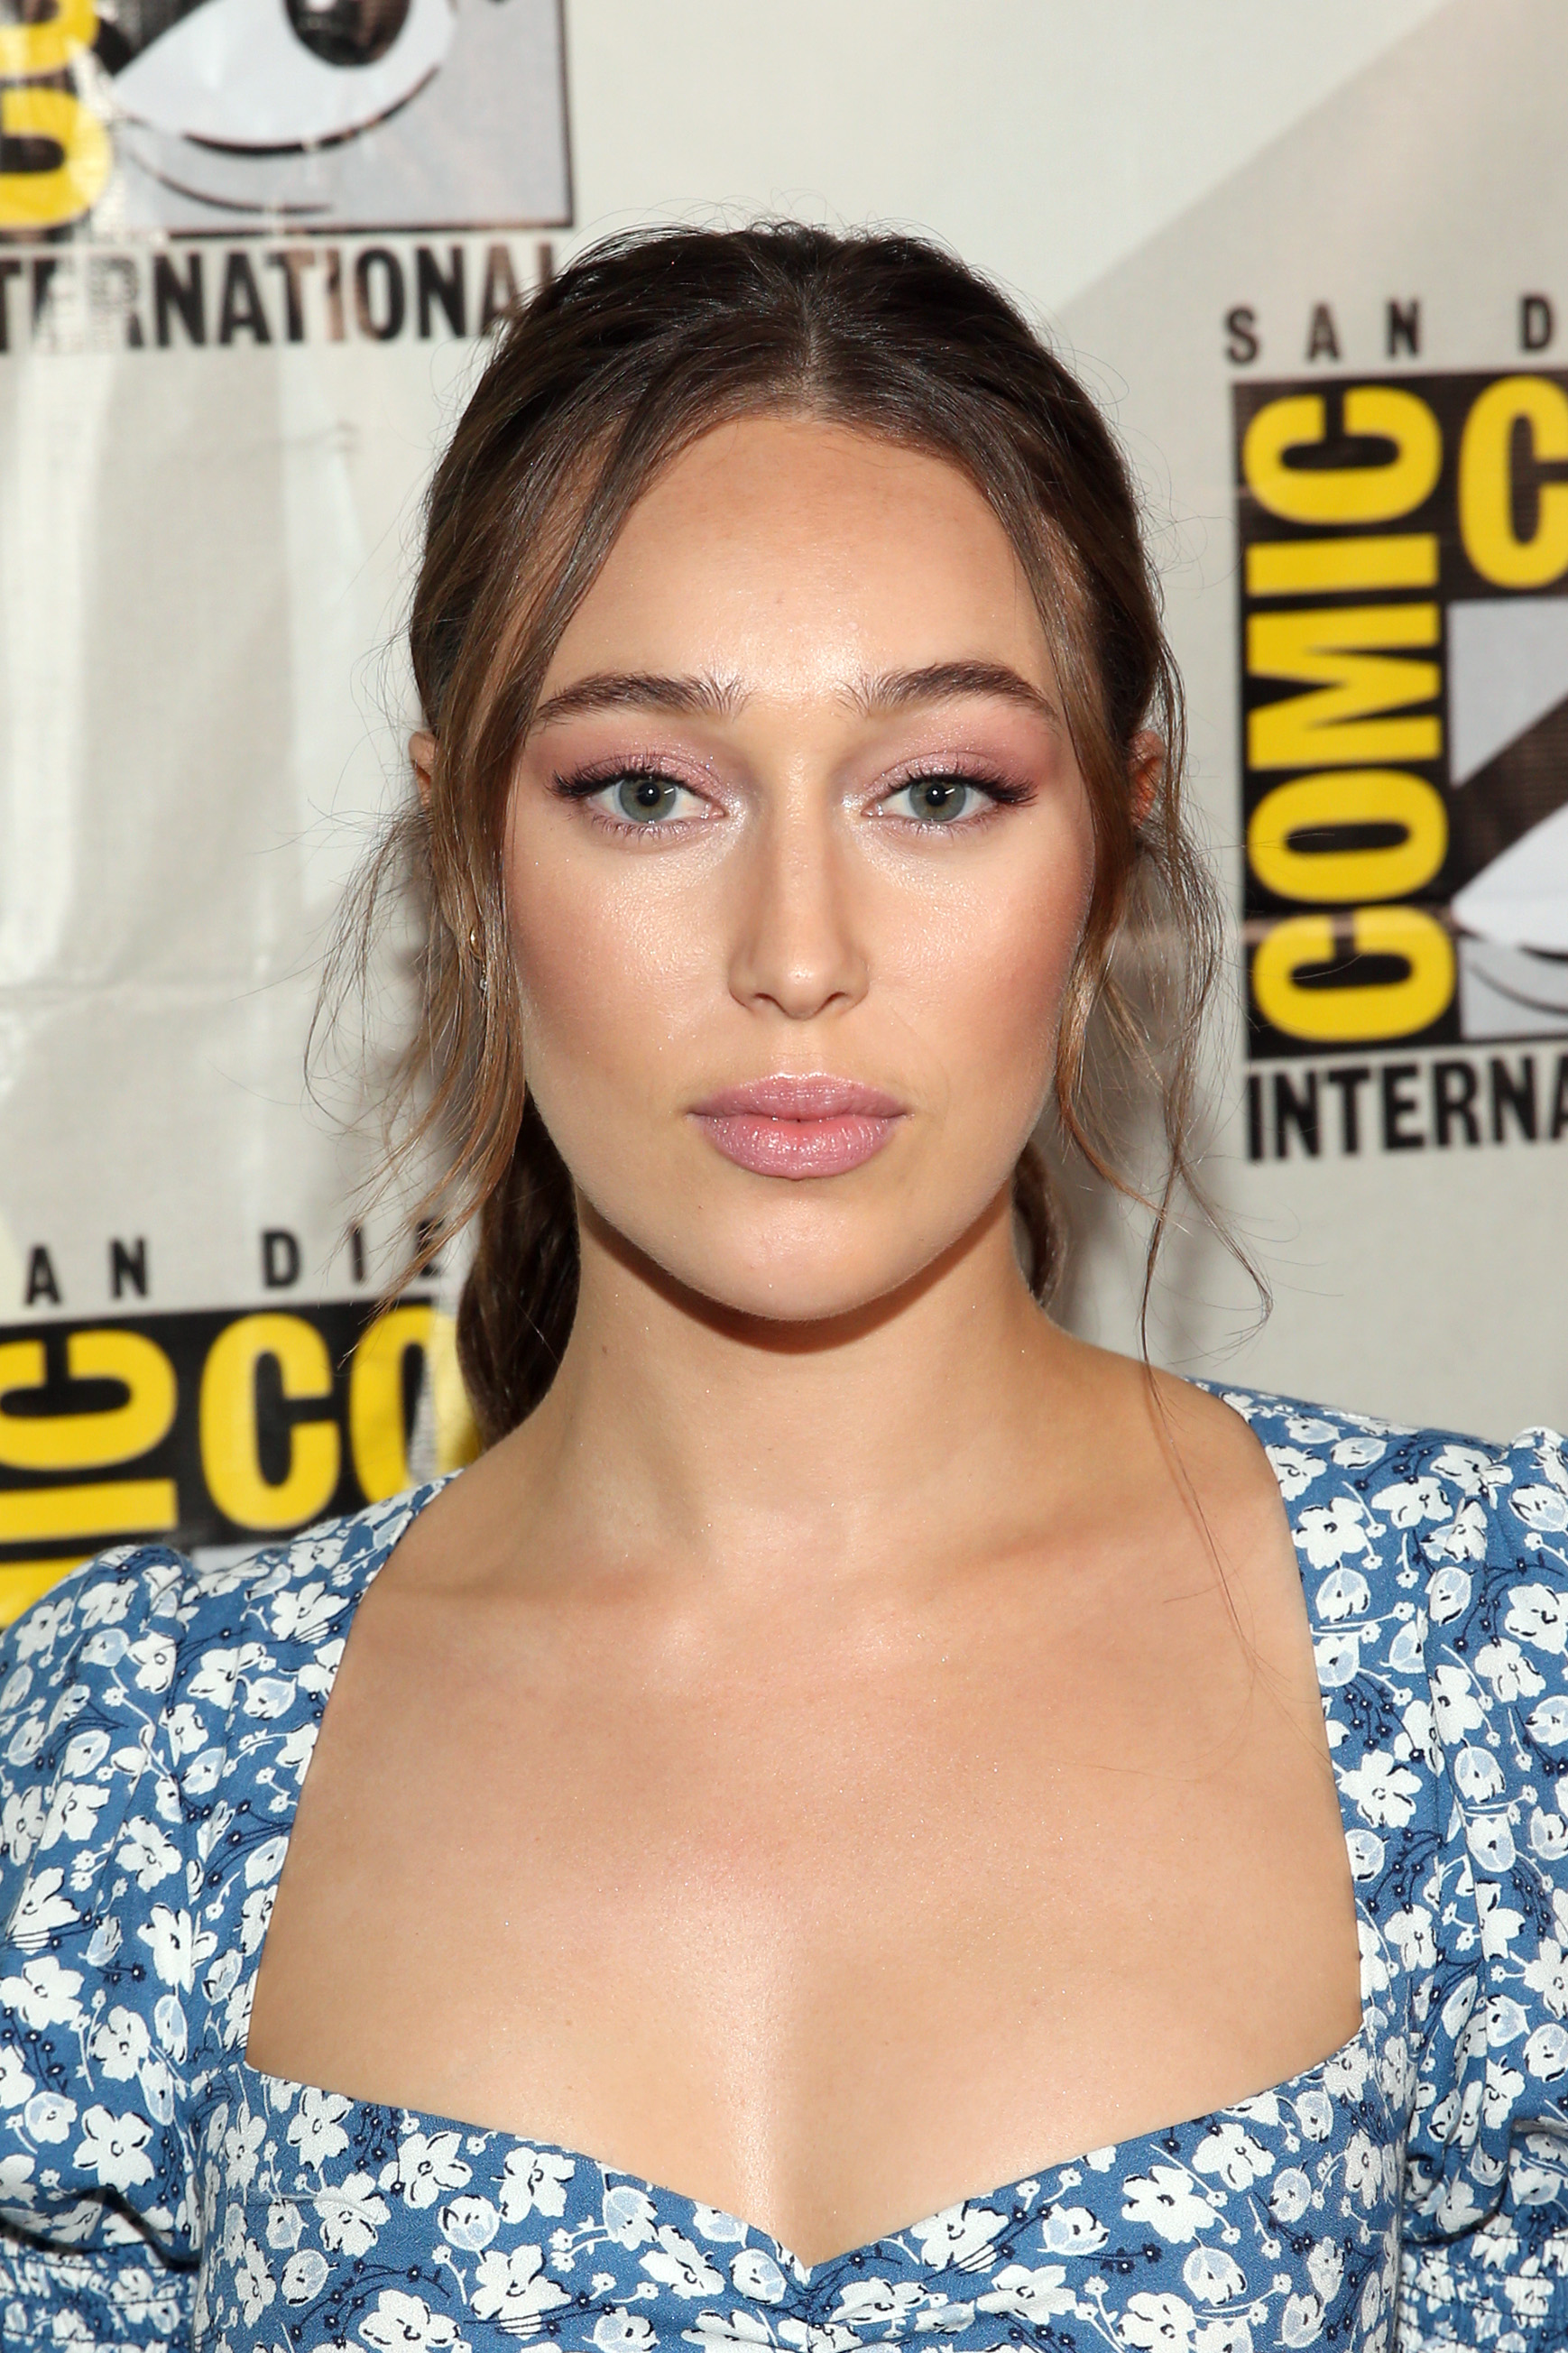 Alycia Debnam-Carey attends the 'Fear the Walking Dead' Panel at Comic Con 2019 on July 19, 2019, in San Diego, California | Source: Getty Images